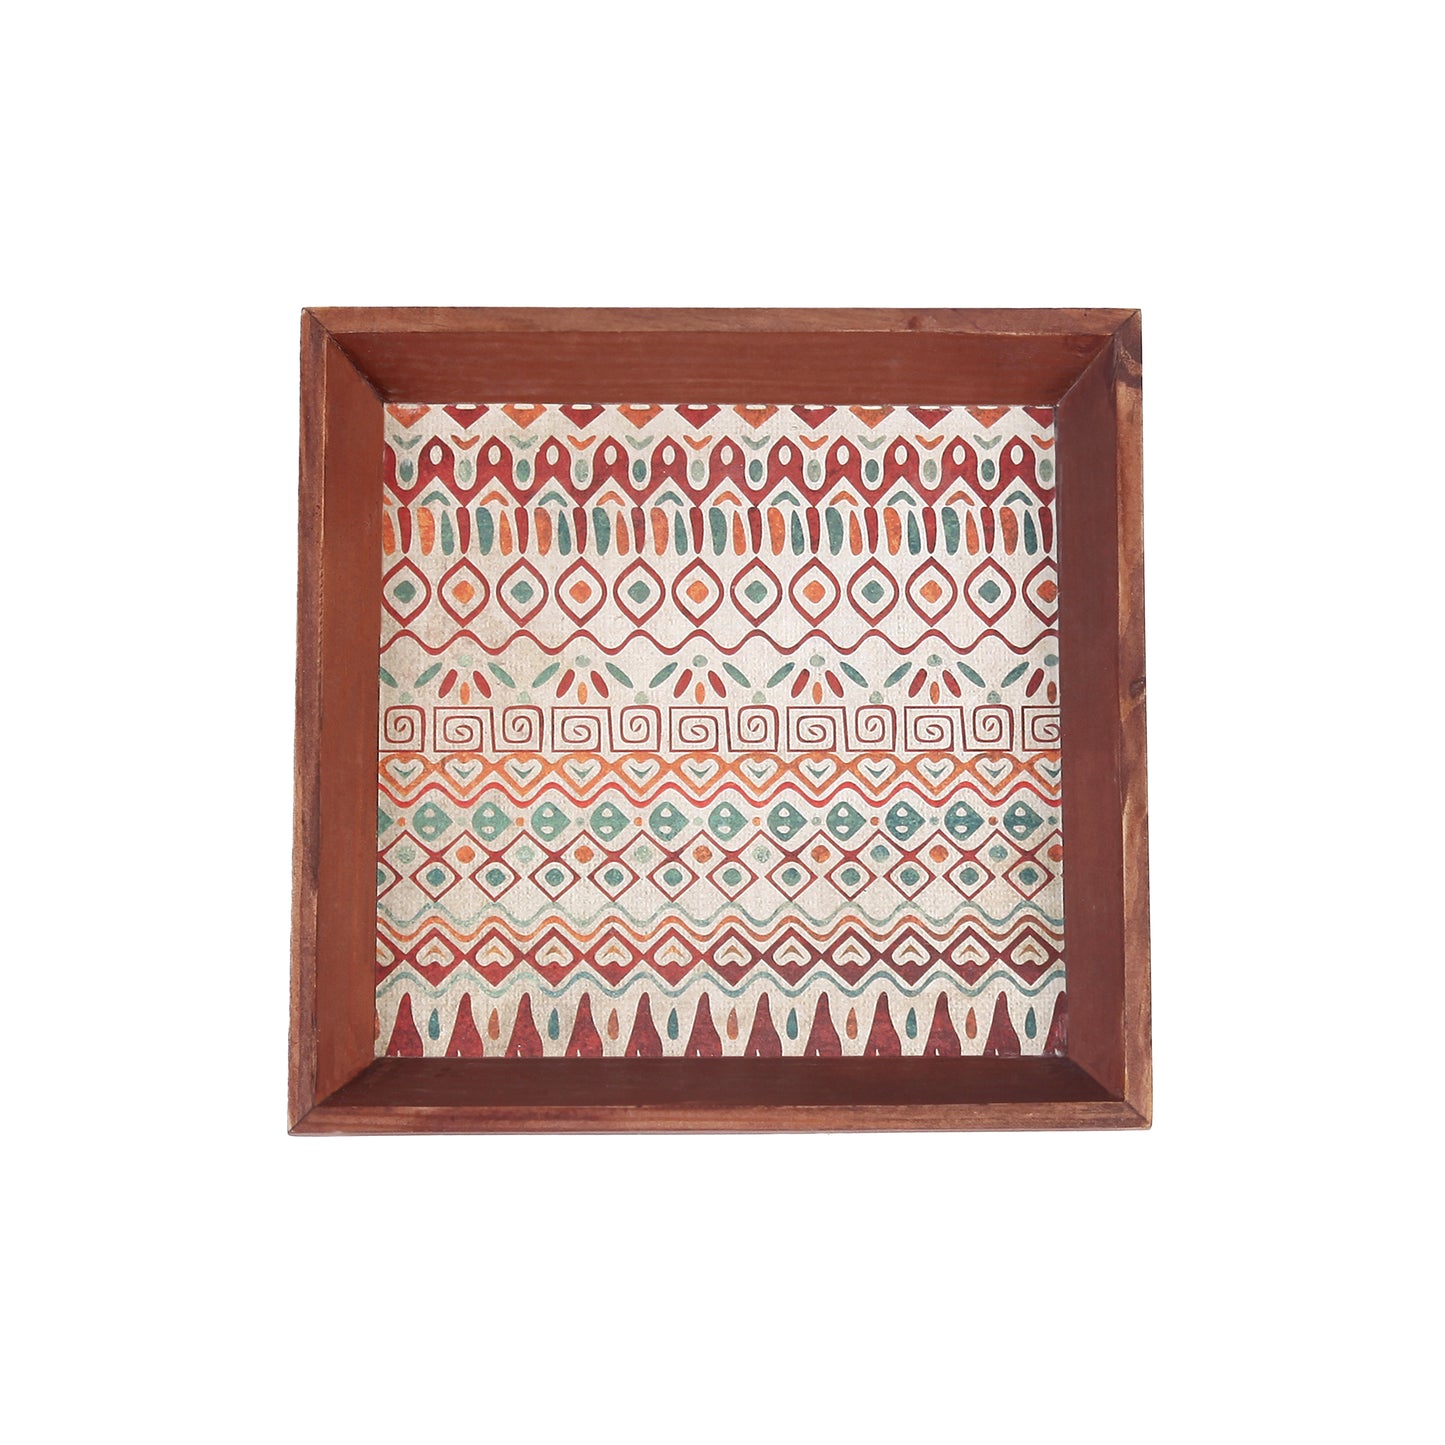 A Tiny Mistake Aztec Small Square Wooden Serving Tray, 18 x 18 x 2 cm